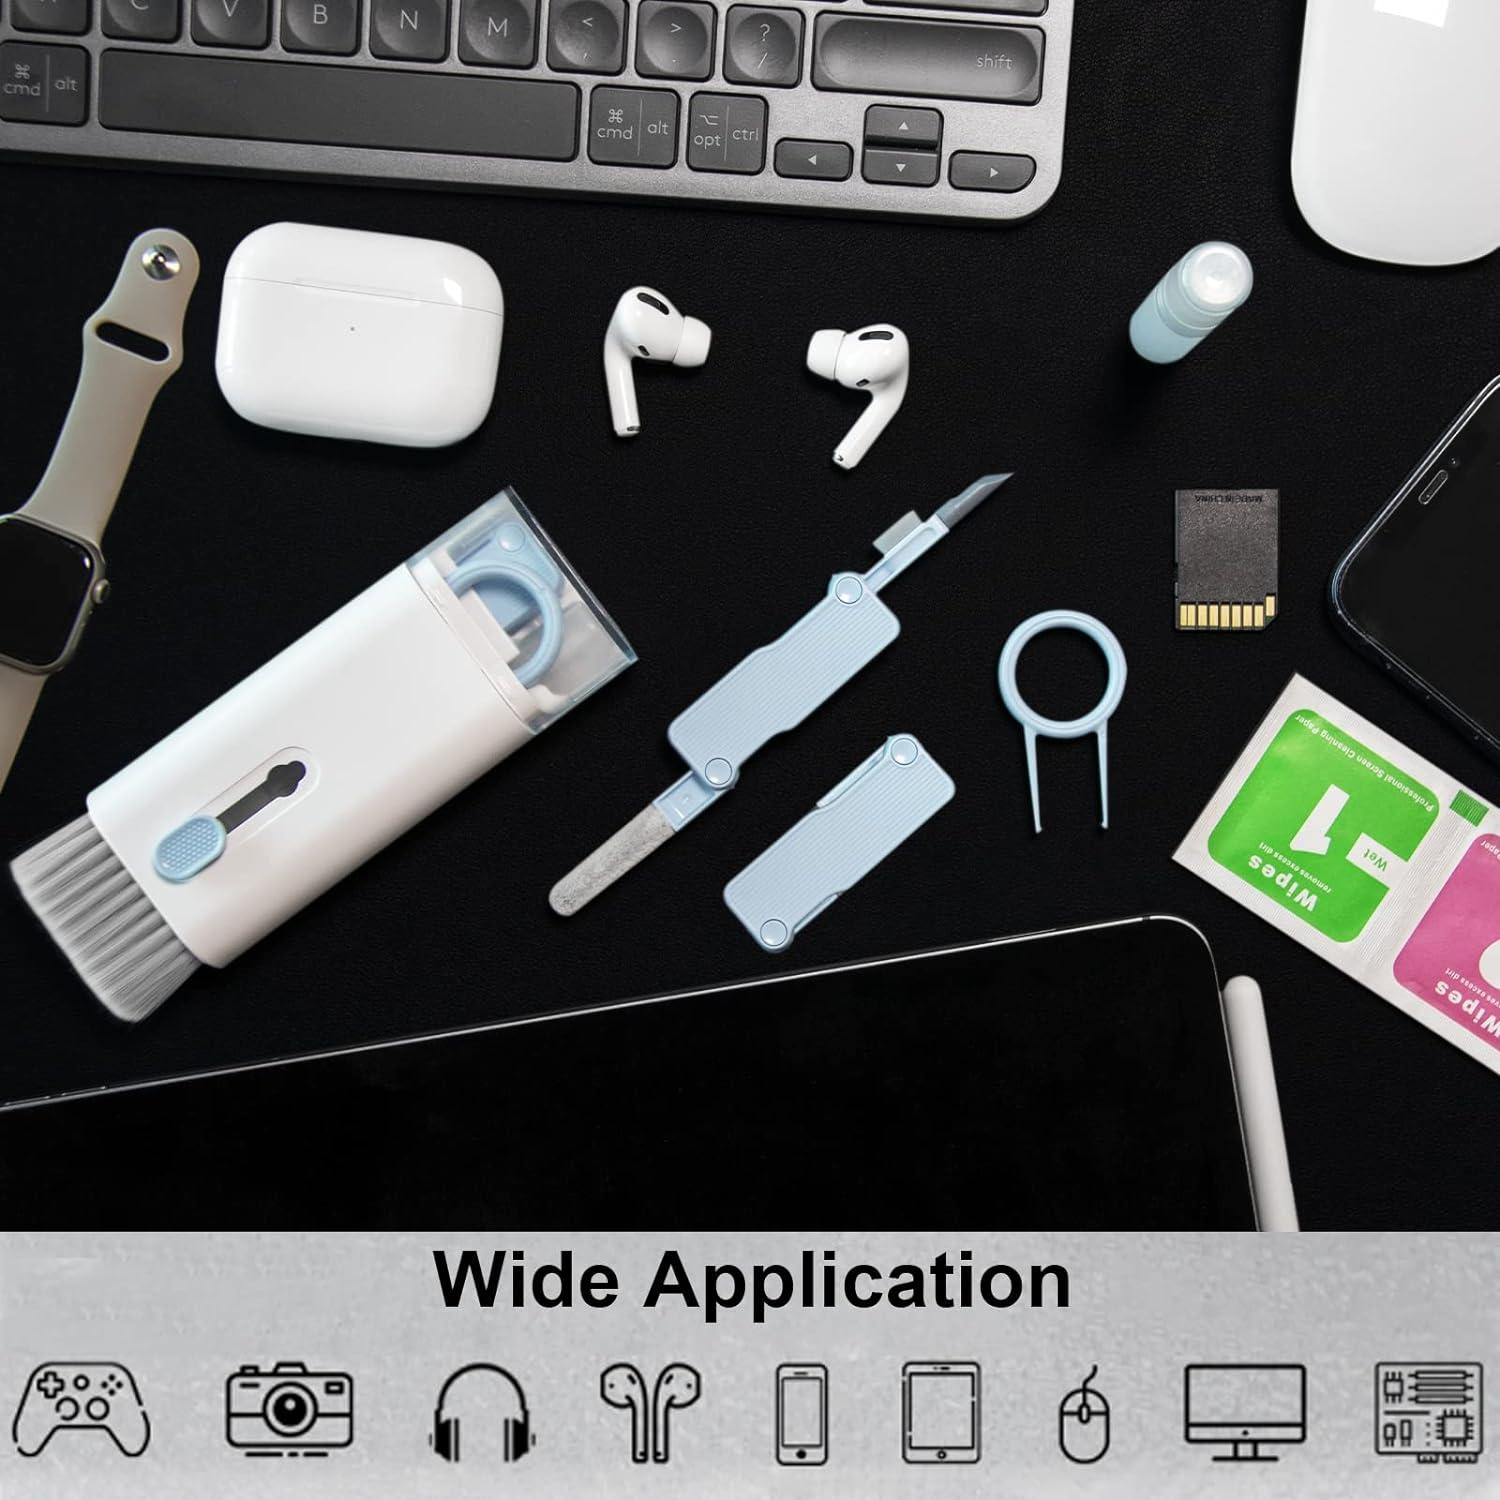 20-in-1 Multi-Functional Cleaning Kit Designed for Cleaning Airpods  Keyboards iPhones Cameras and Computer Screens Featuring Portable Storage  Design